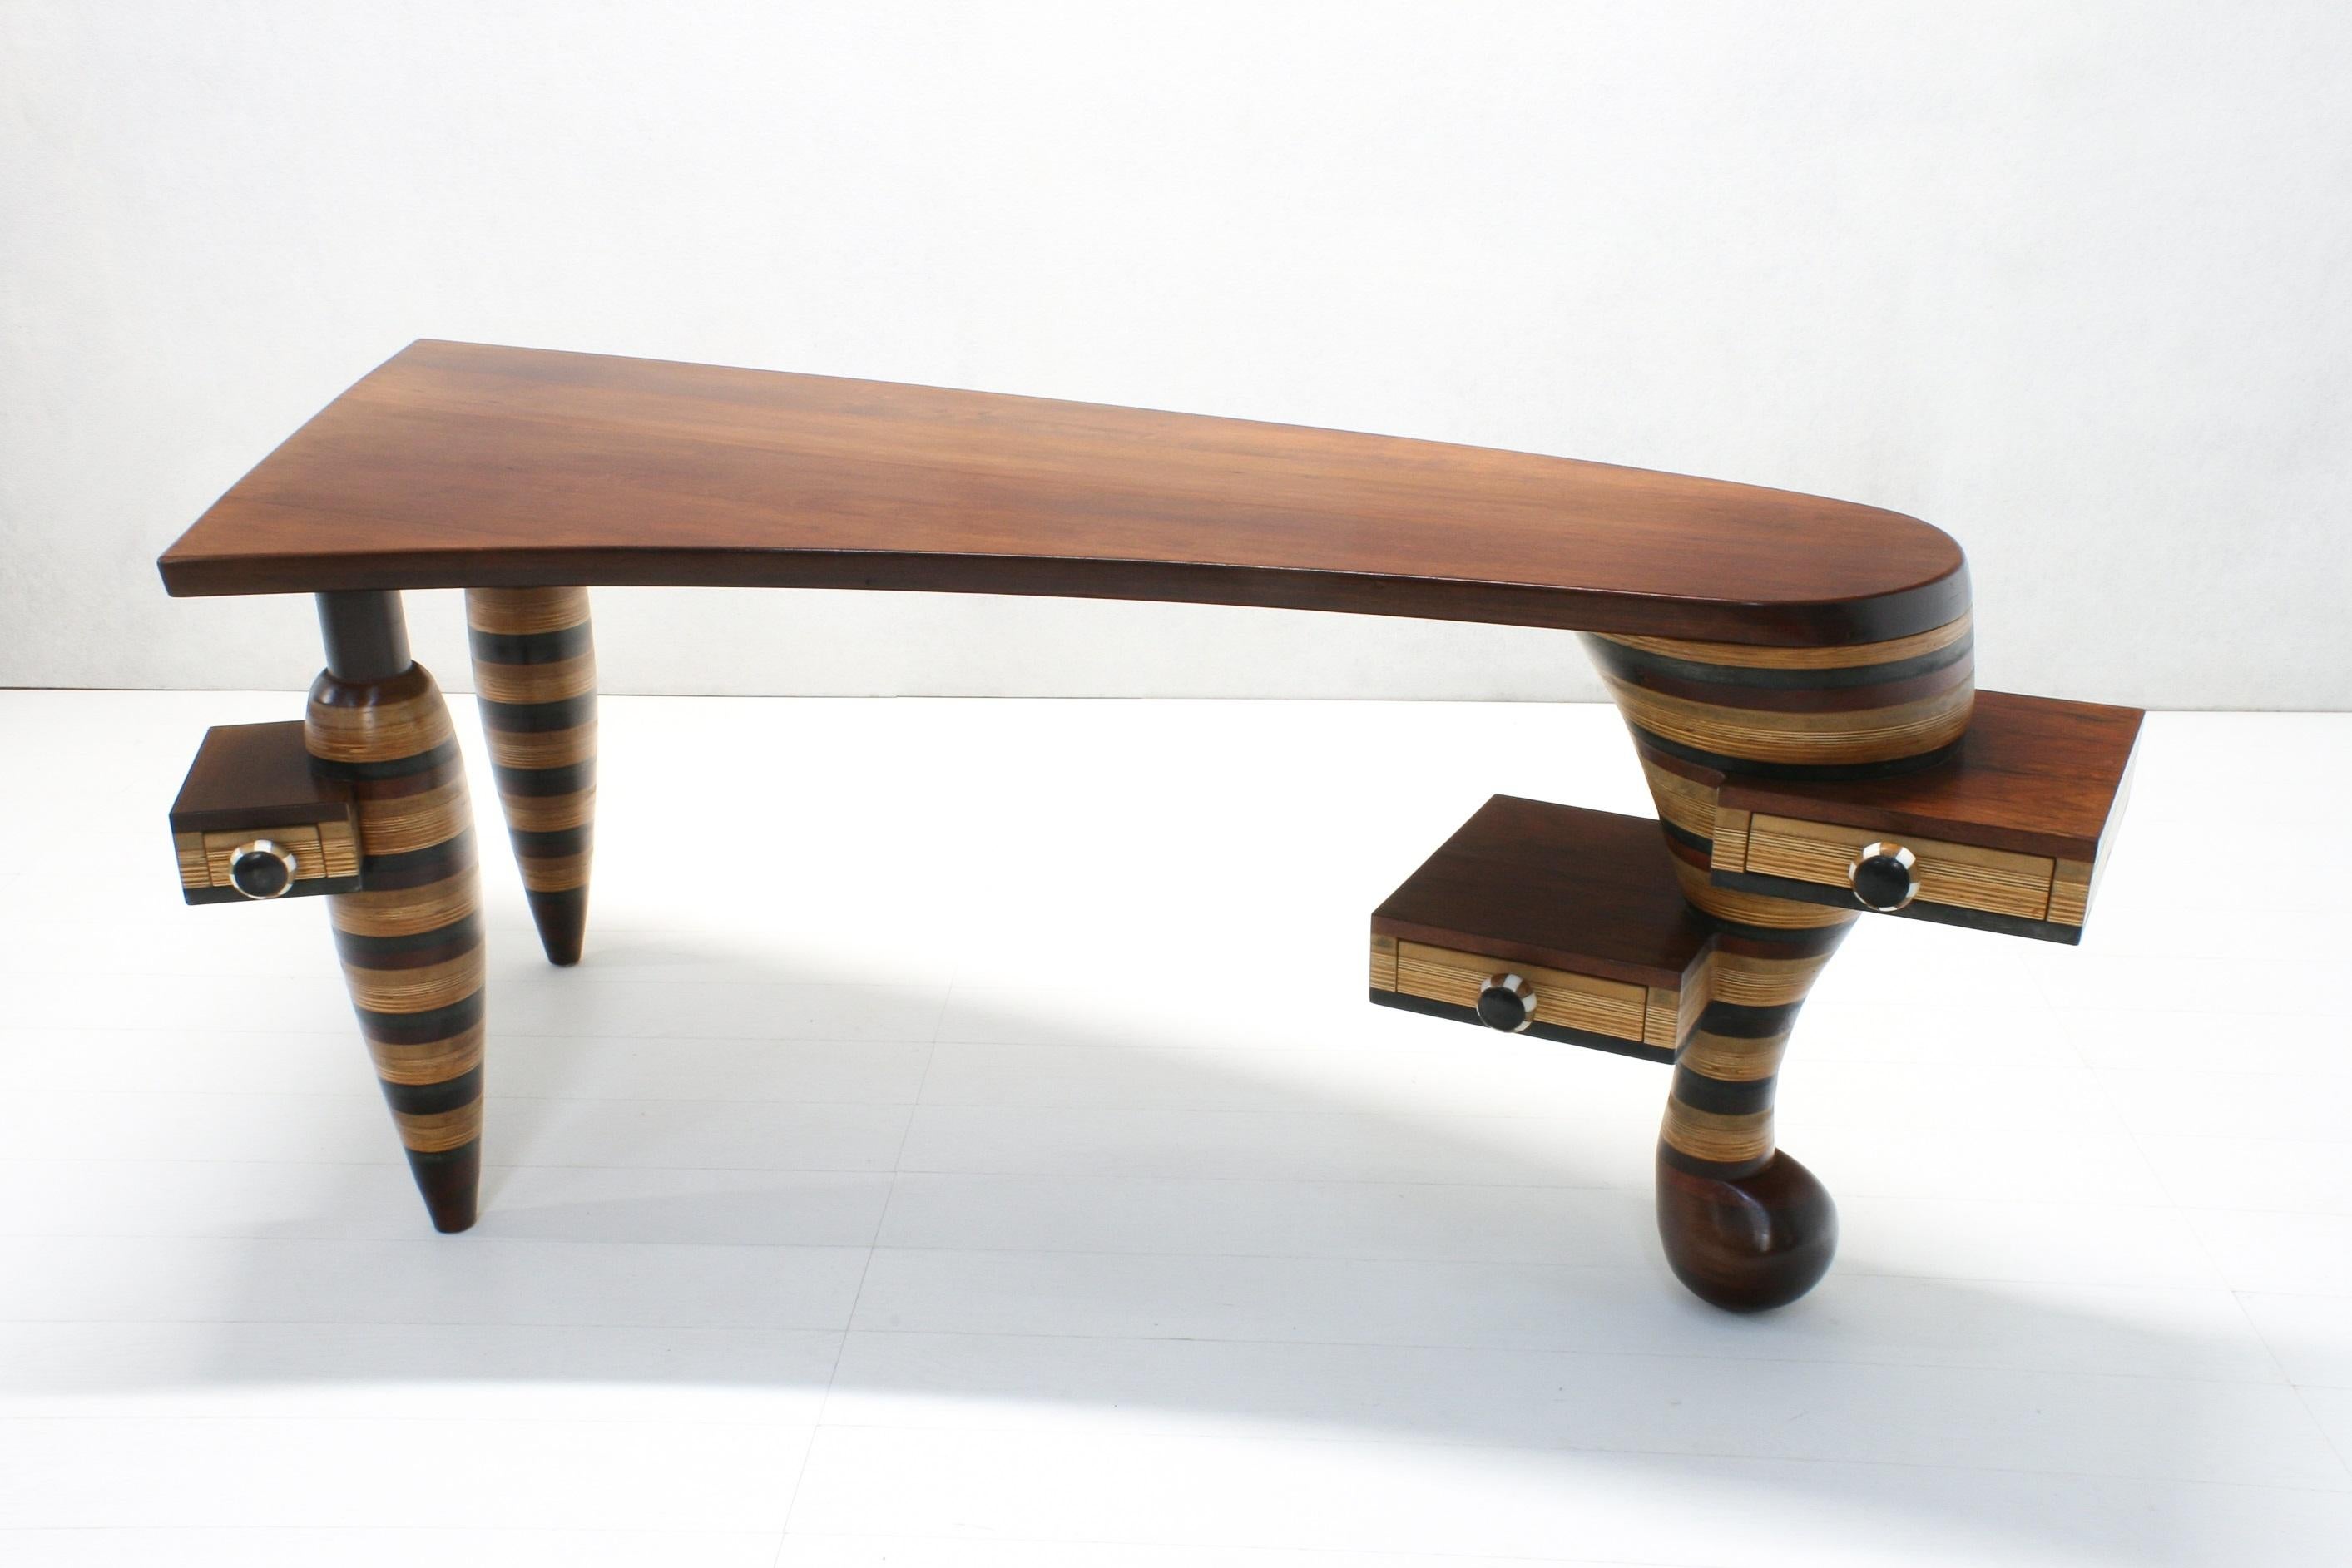 Dutch Most Unique Handcrafted Organic 3-Legged Laminated Cherry Wood Desk For Sale